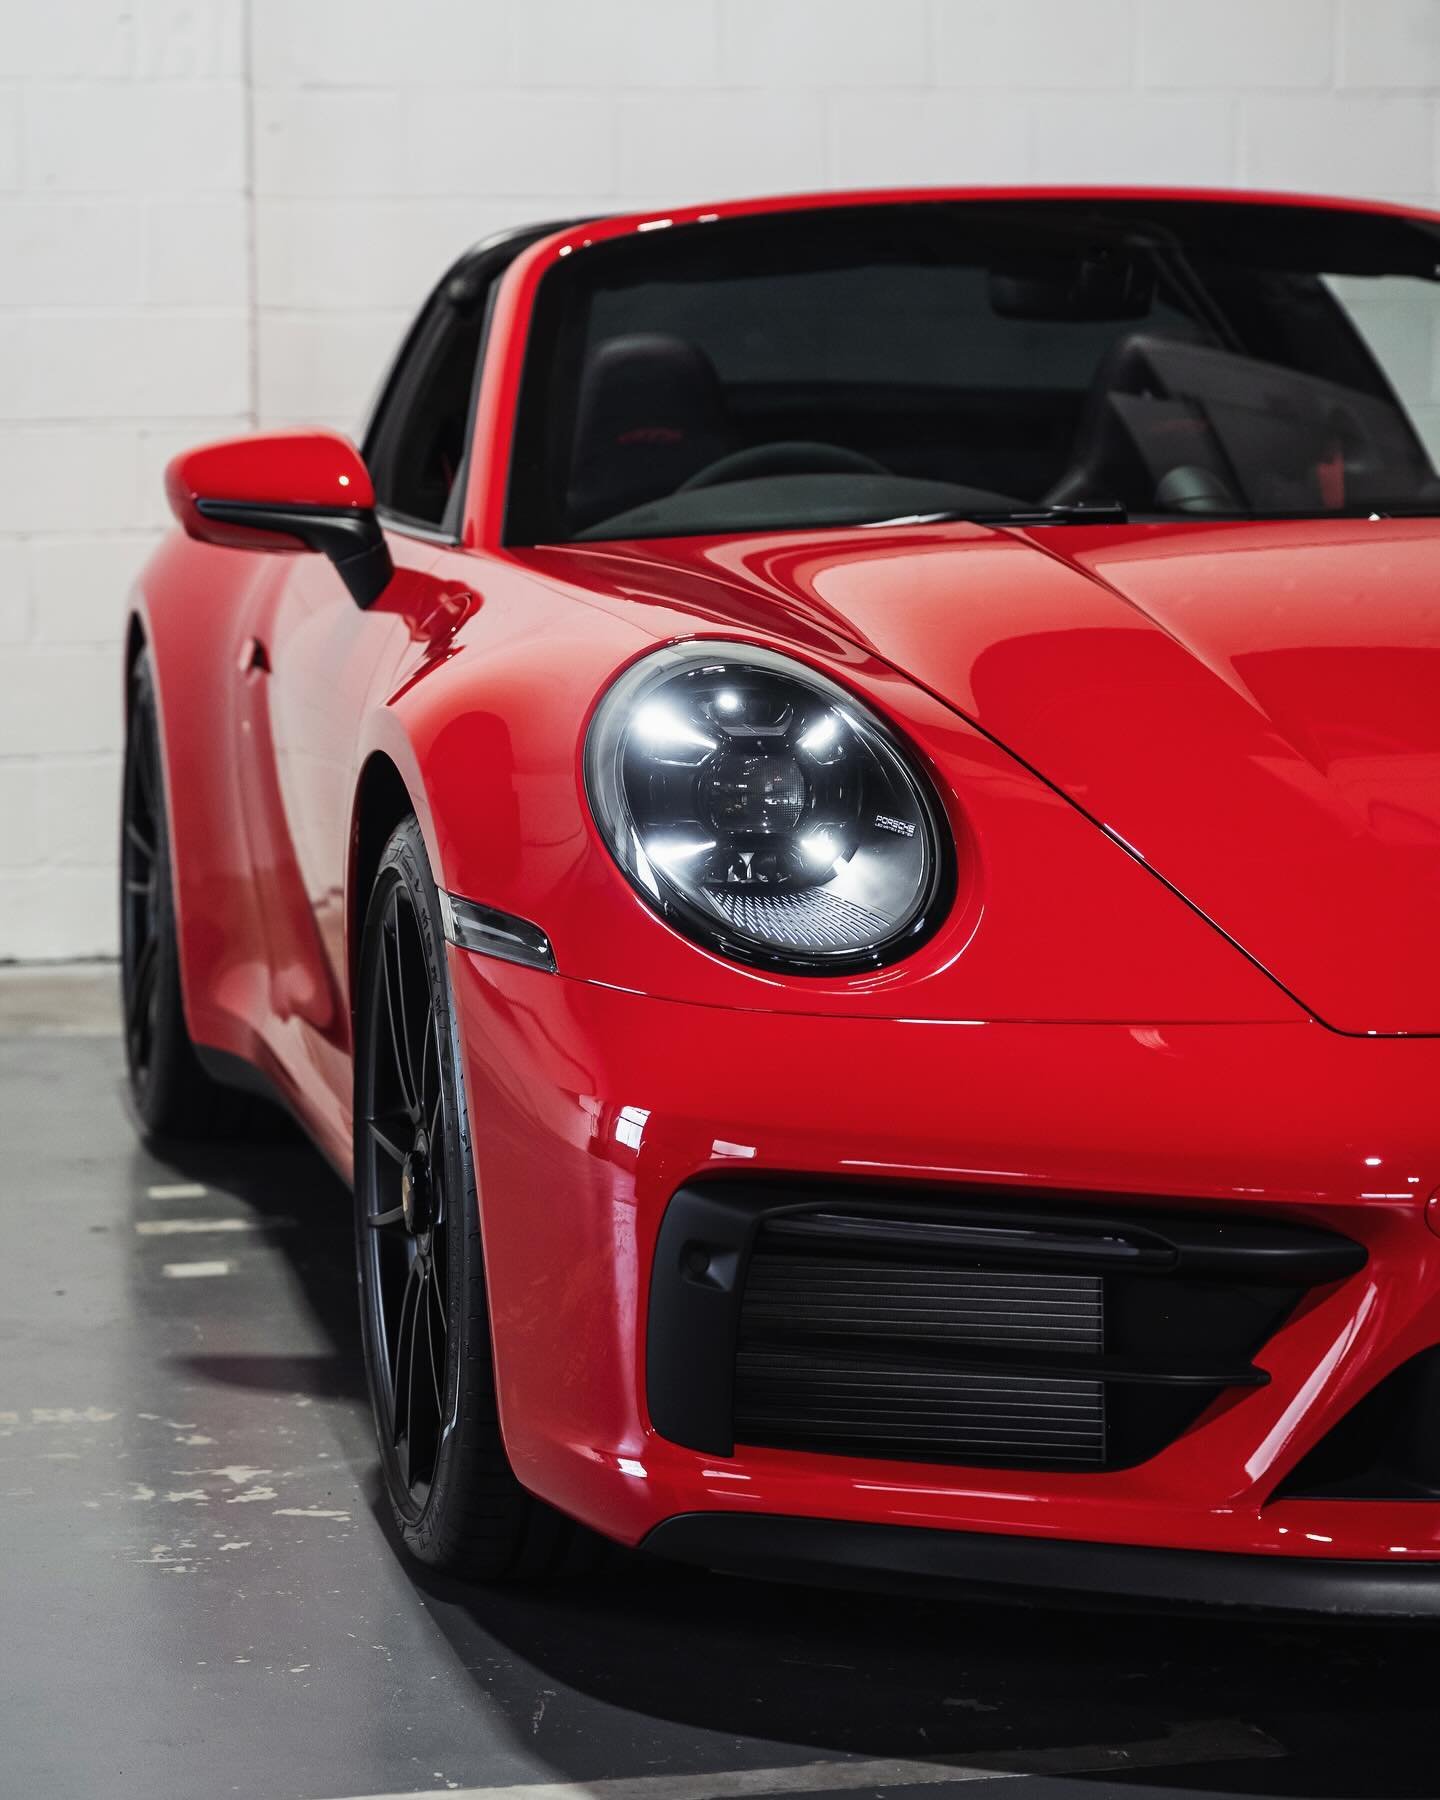 This is genuinely my pick out of all the 911 variants. I&rsquo;ll take a targa roof, smooth gearbox and comfortable seats over a GT3 any day 😆

Targa 4 GTS in guards red w/ center locks &amp; black roof 👌🏼